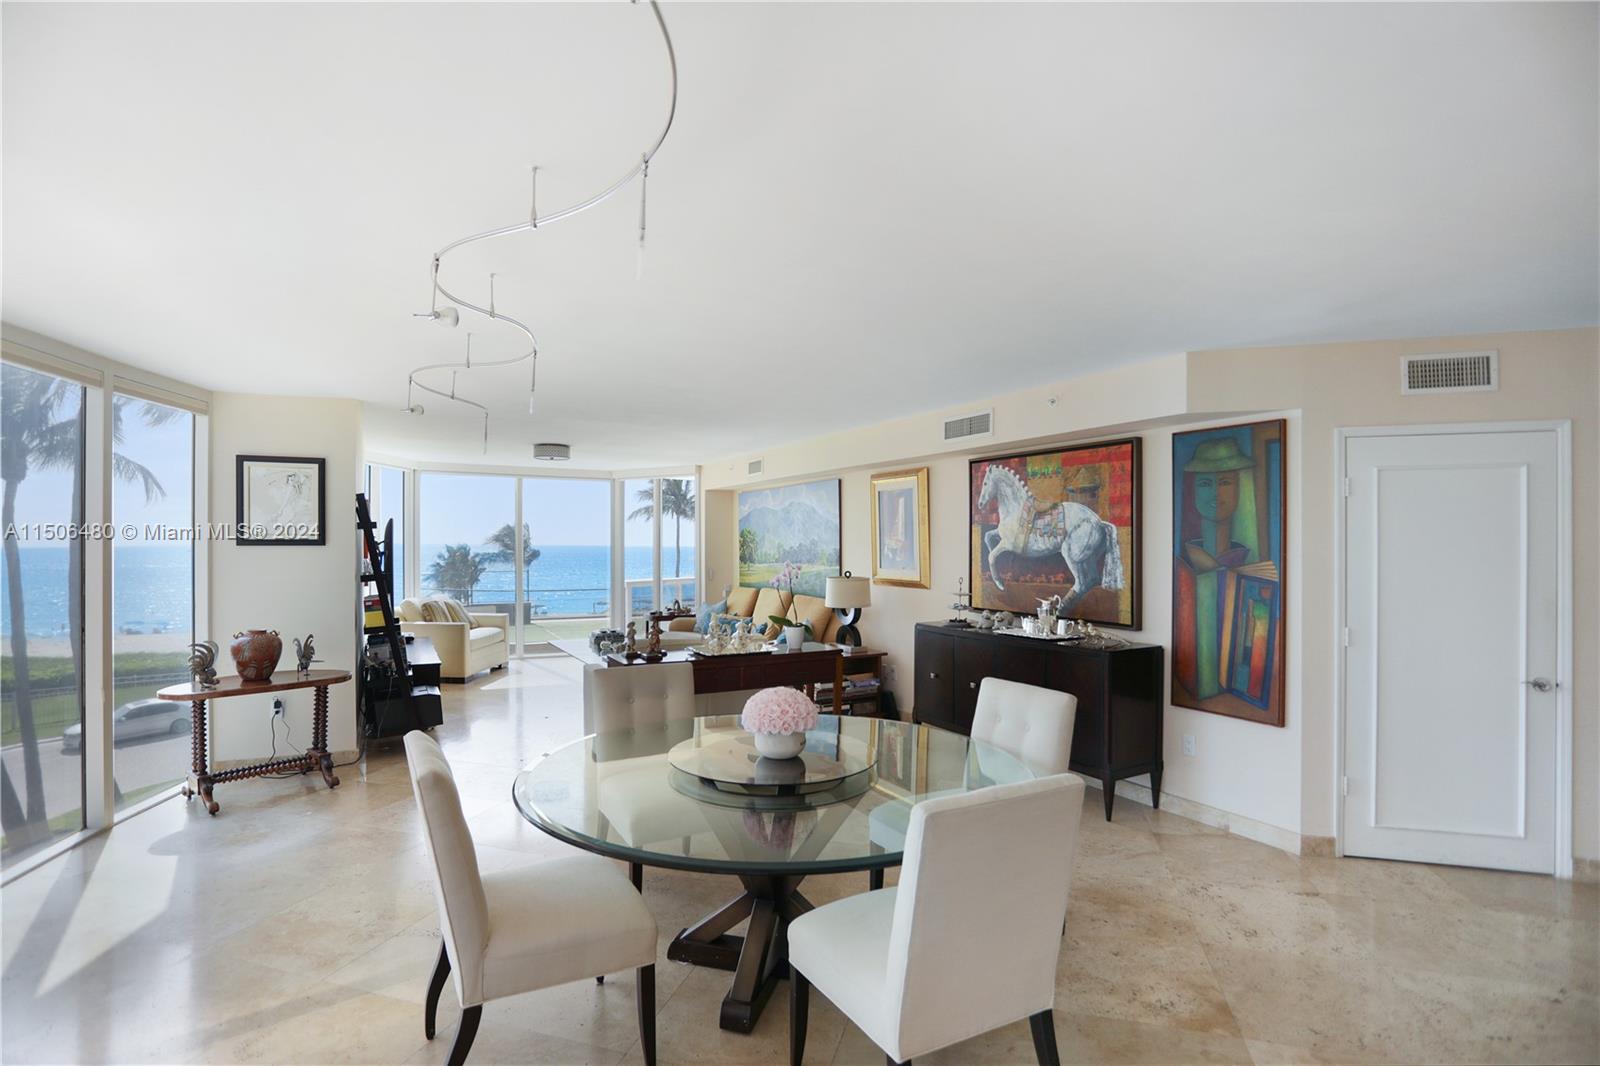 Price includes Beach Cabana & 2 parking spaces. UPDATED 2,274 ft2, 3-bed, 3-bath corner unit at Pinnacle Condo with amazing ocean views, marble & wood floors. Ocean-view master bath, dual sinks, separate toilet & bidet, large shower, hot tub, walk-in closet. Eat-in kitchen with ocean & city views. Large living/dining areas. Pet-friendly building on 4 acres of land with 400 feet on the Atlantic Ocean. 5-star services: 24/7 front desk, package receiving, pool/beach service, valet parking. Amenities incl. a kids’ room, billiards room, ping pong, tennis court, heated pool & spa, fully-equipped fitness center, men's & women's spas, saunas & steam rooms, massage room for couples’ massage, media/social room (ideal for private events), cigar room, meeting rooms, residents’ lounge, dog park & more.